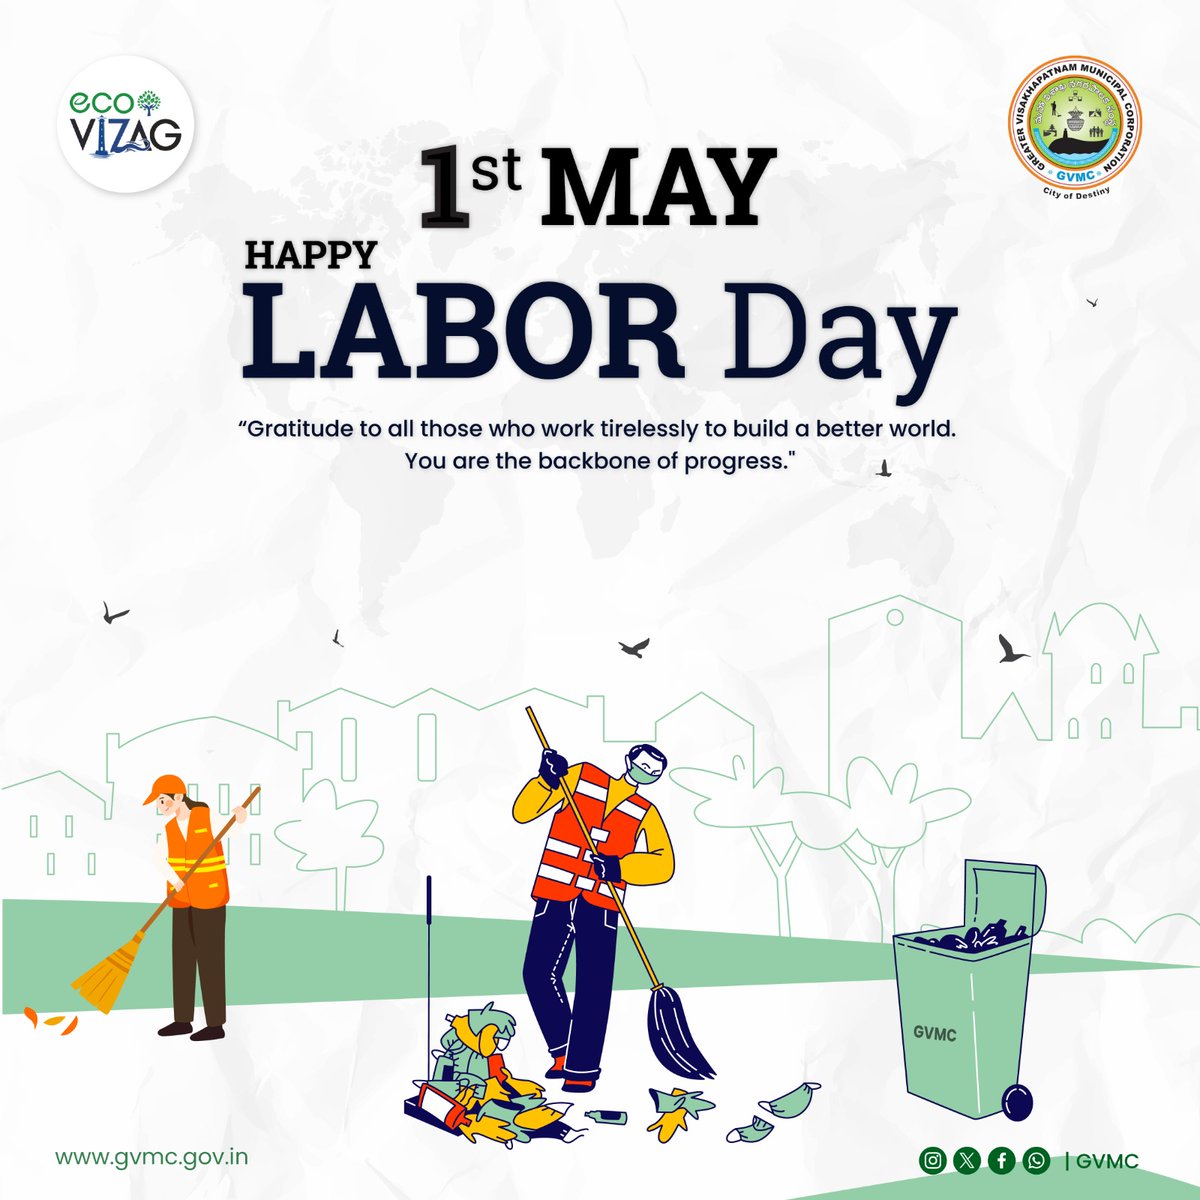 Happy Labor Day! Today, we honor the efforts of all workers in our city. Their dedication and contributions are invaluable to our community. Let's take this opportunity to show appreciation. @SwachhBharatGov @SwachhaAndhra @SwachSurvekshan @swachhbharat @pibvijayawada…